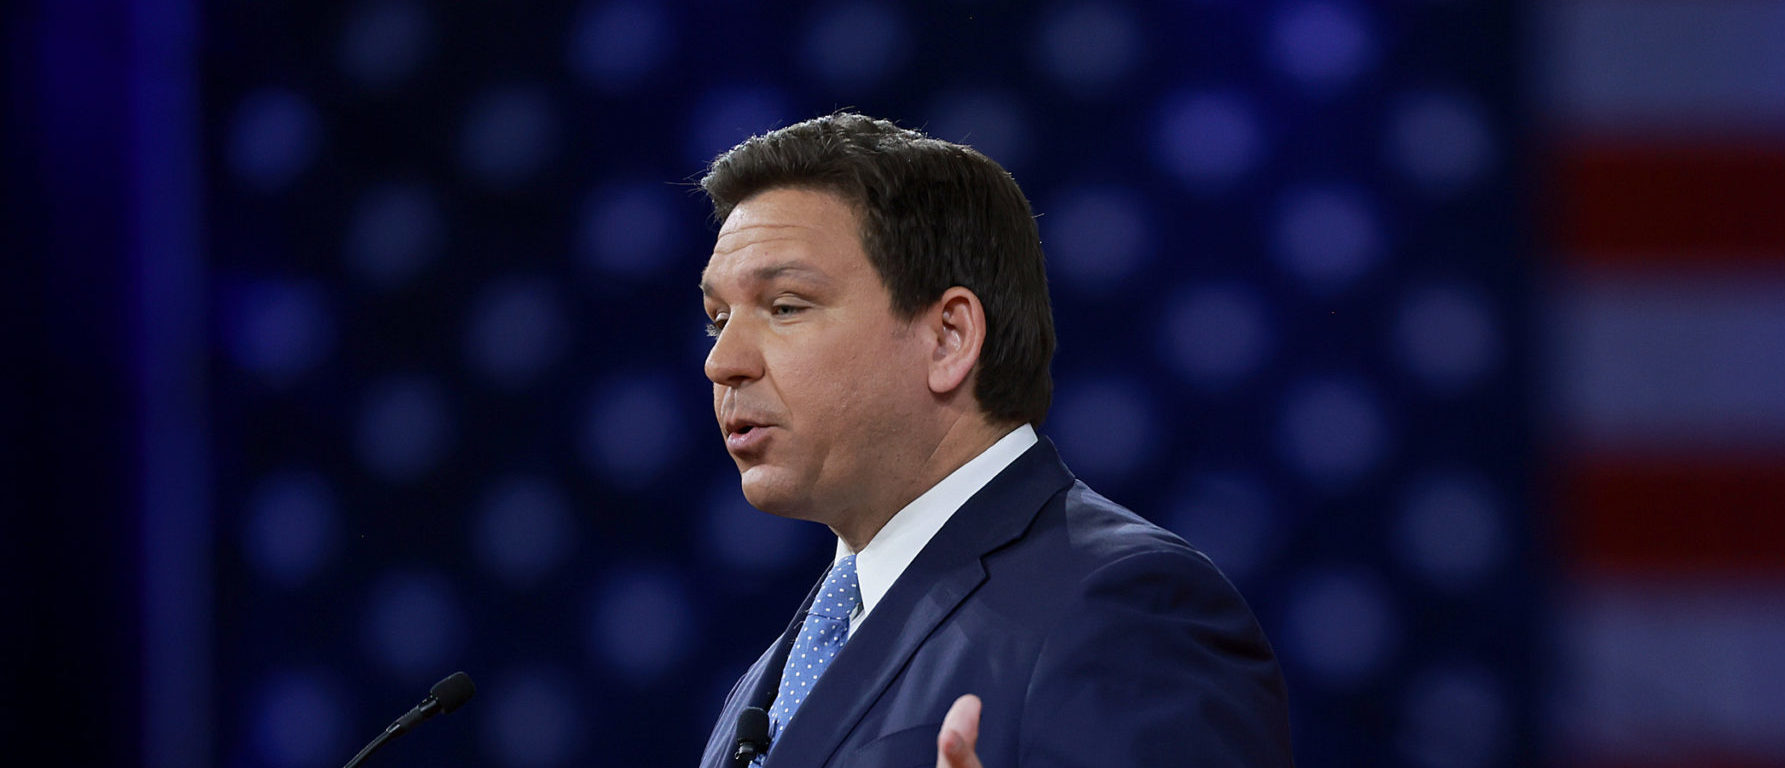 ORLANDO, FLORIDA - FEBRUARY 24: Florida Gov. Ron DeSantis speaks at the Conservative Political Action Conference (CPAC) at The Rosen Shingle Creek on February 24, 2022 in Orlando, Florida. CPAC, which began in 1974, is an annual political conference attended by conservative activists and elected officials. (Photo by Joe Raedle/Getty Images)